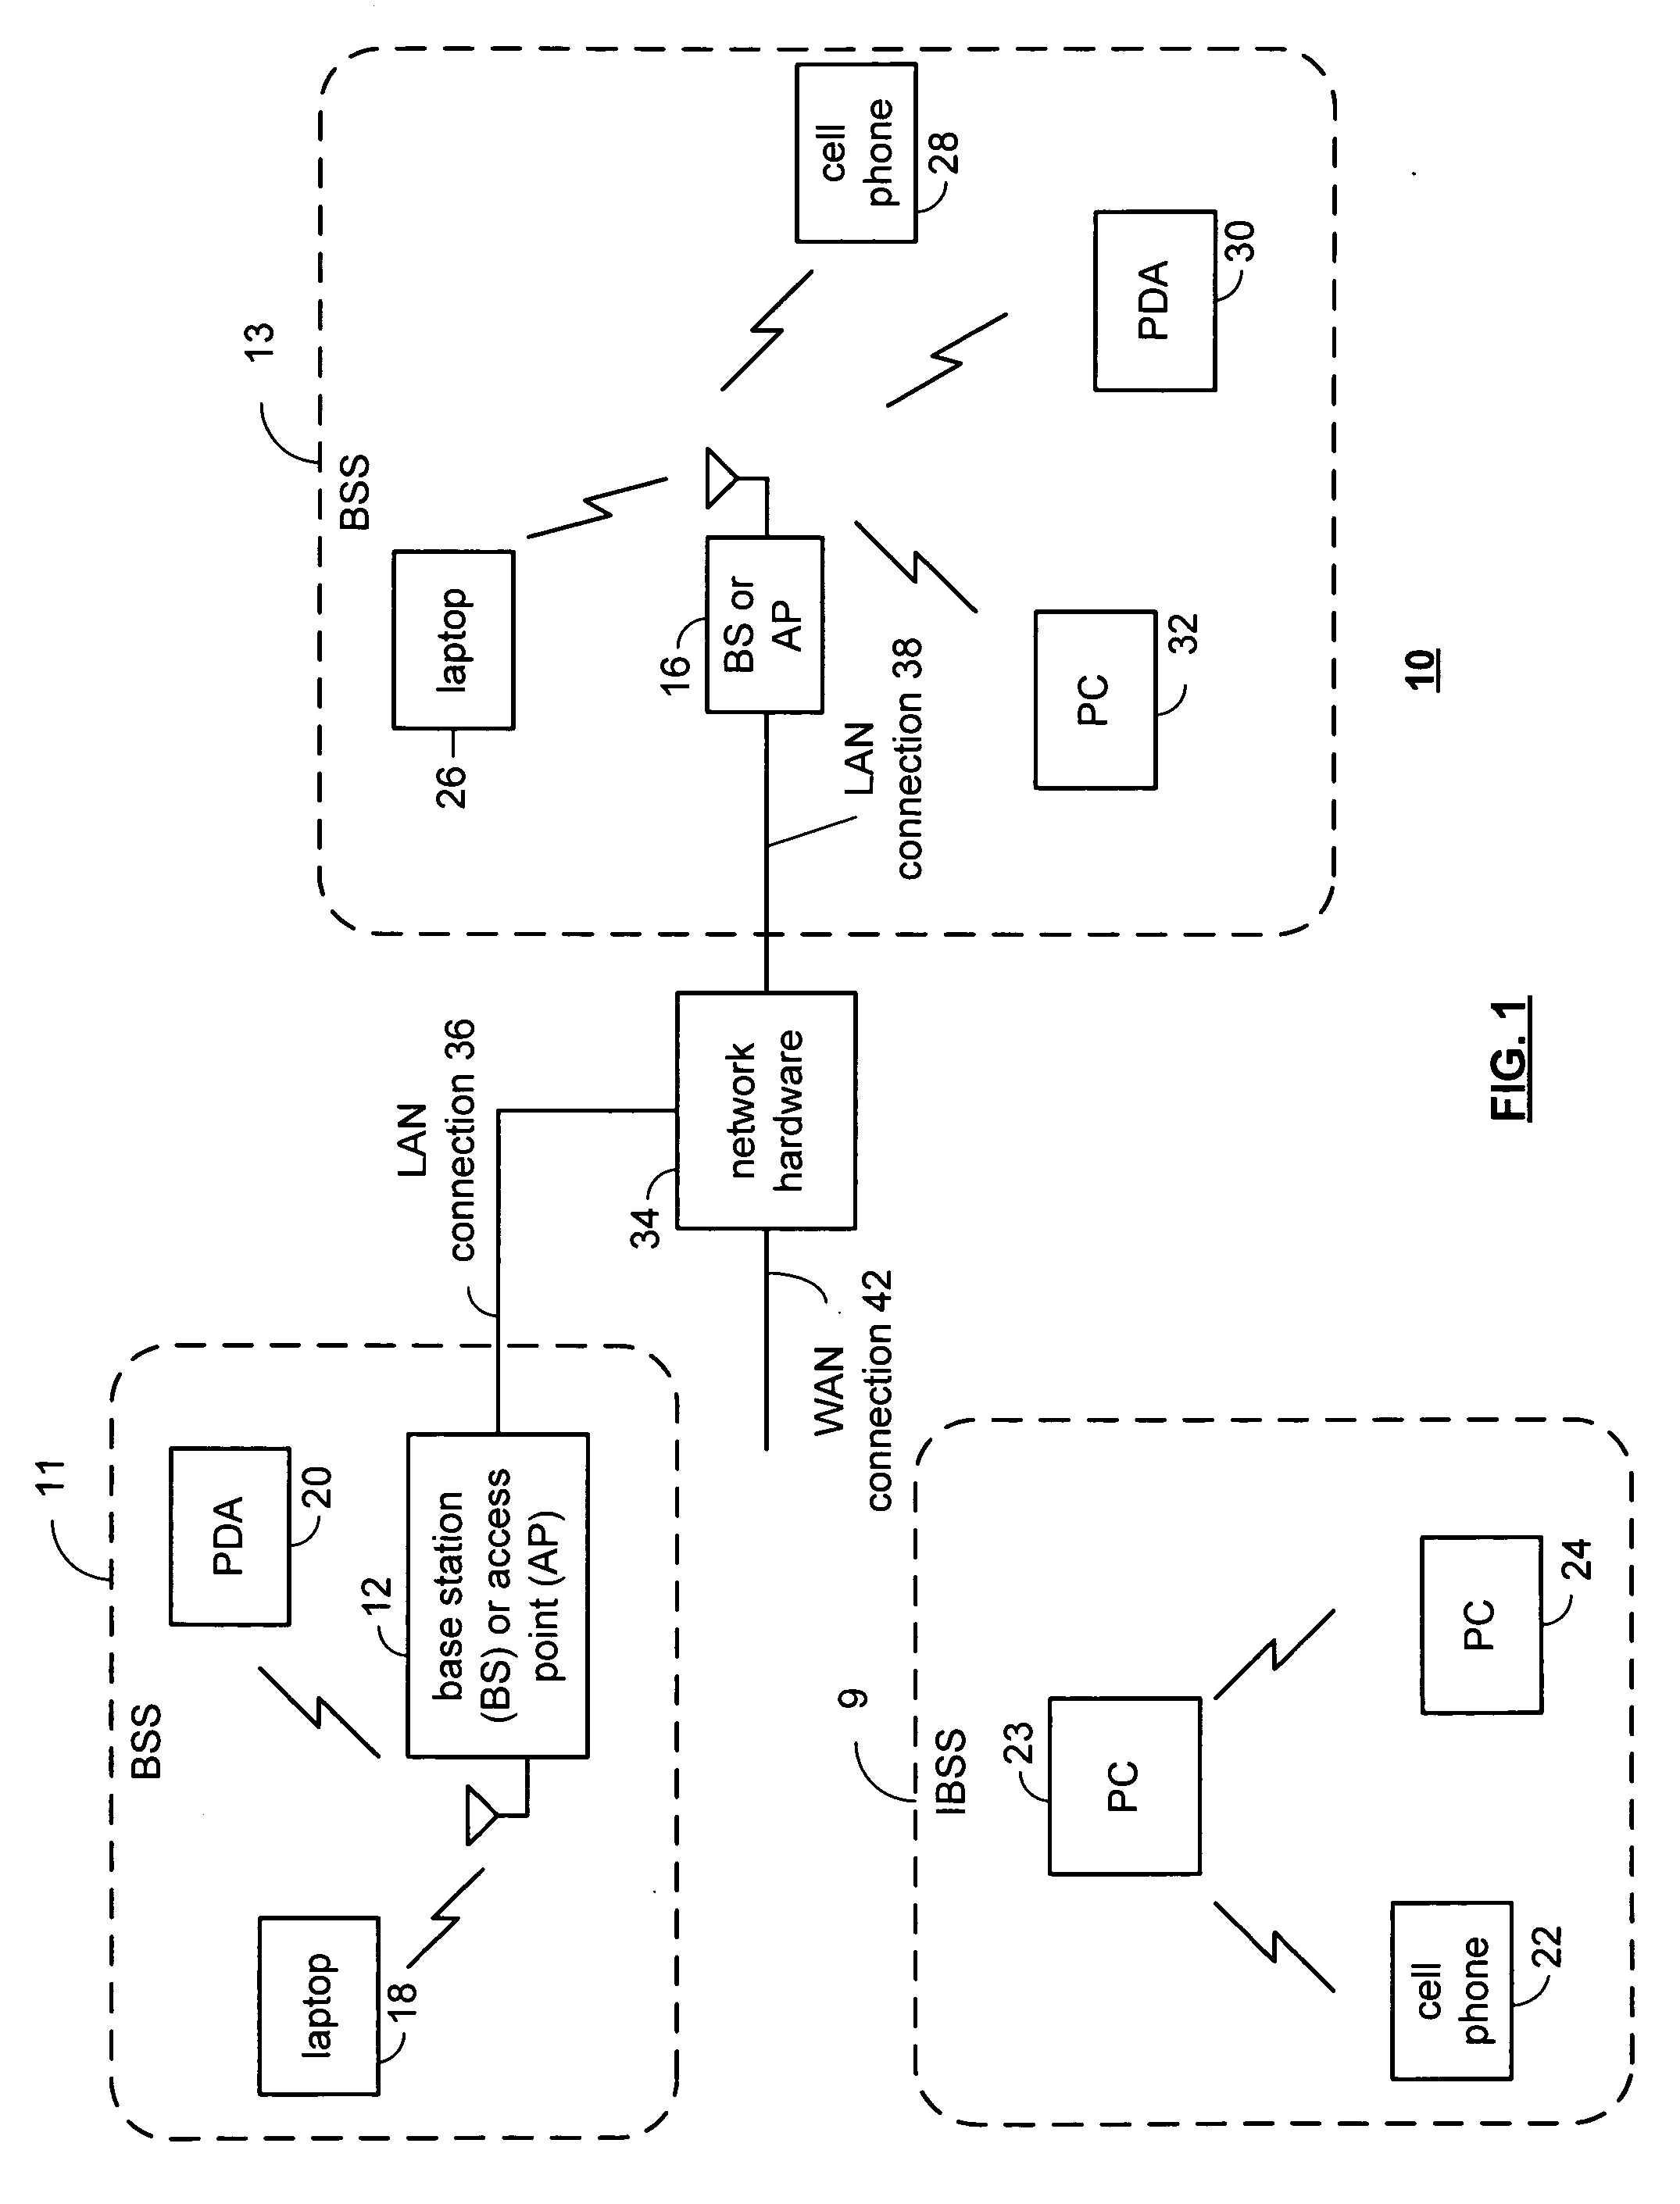 Adaptive modulation in a multiple input multiple output wireless communication system with optional beamforming